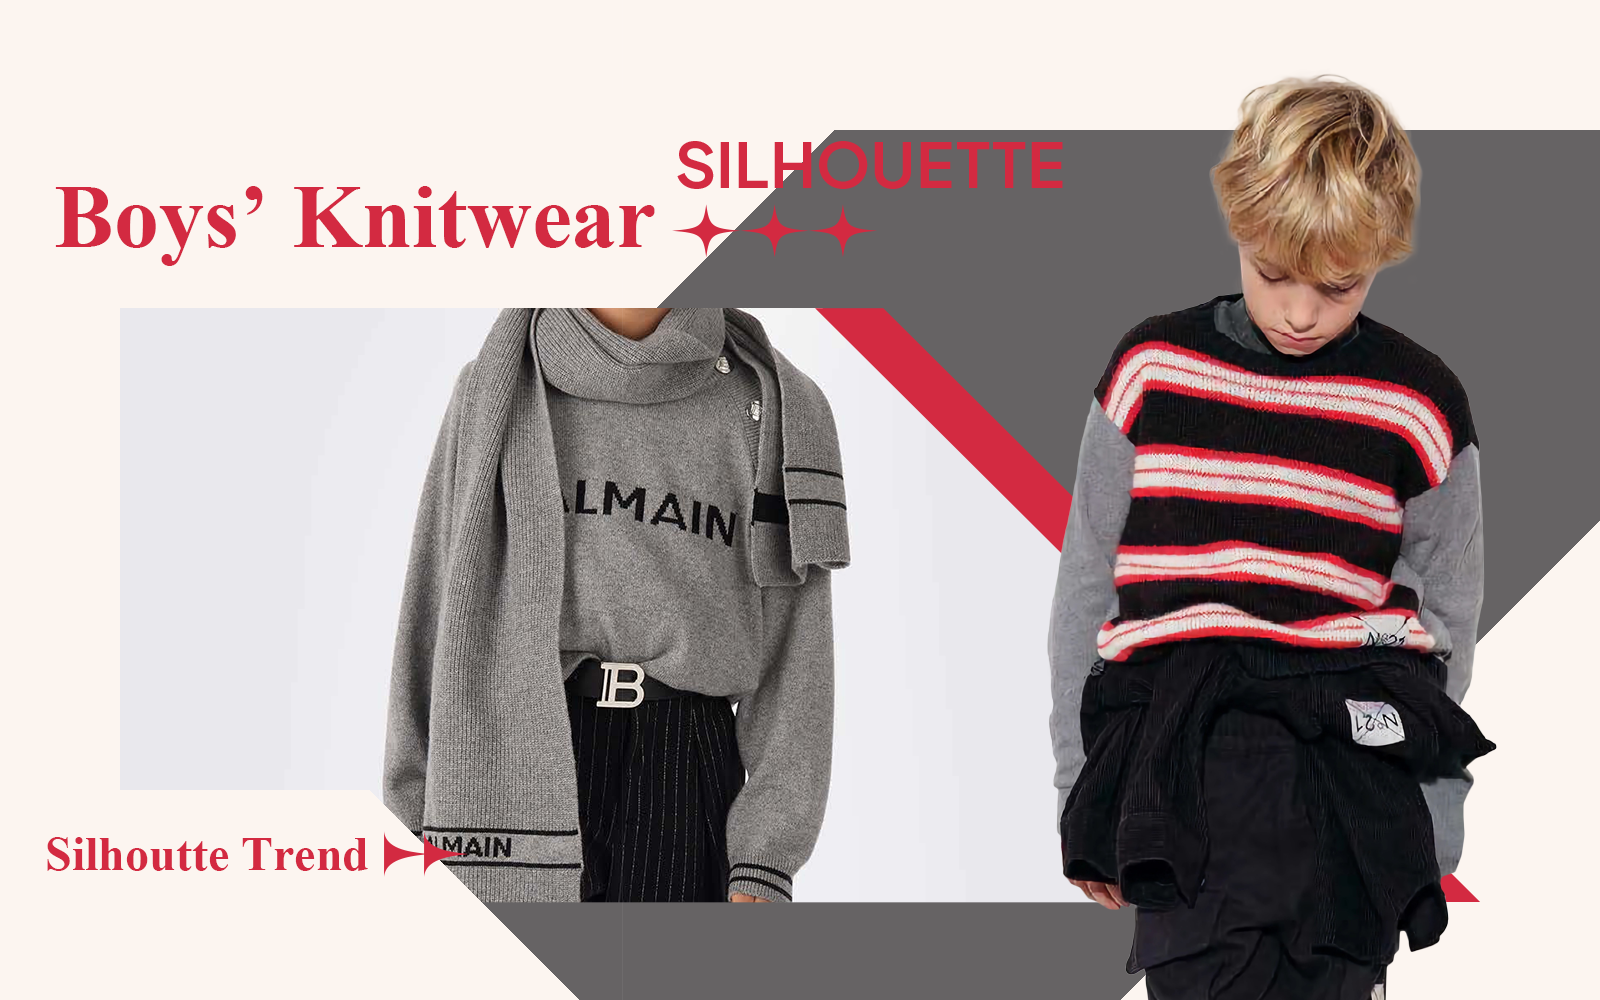 The Silhouette Trend for Boys' Knitwear